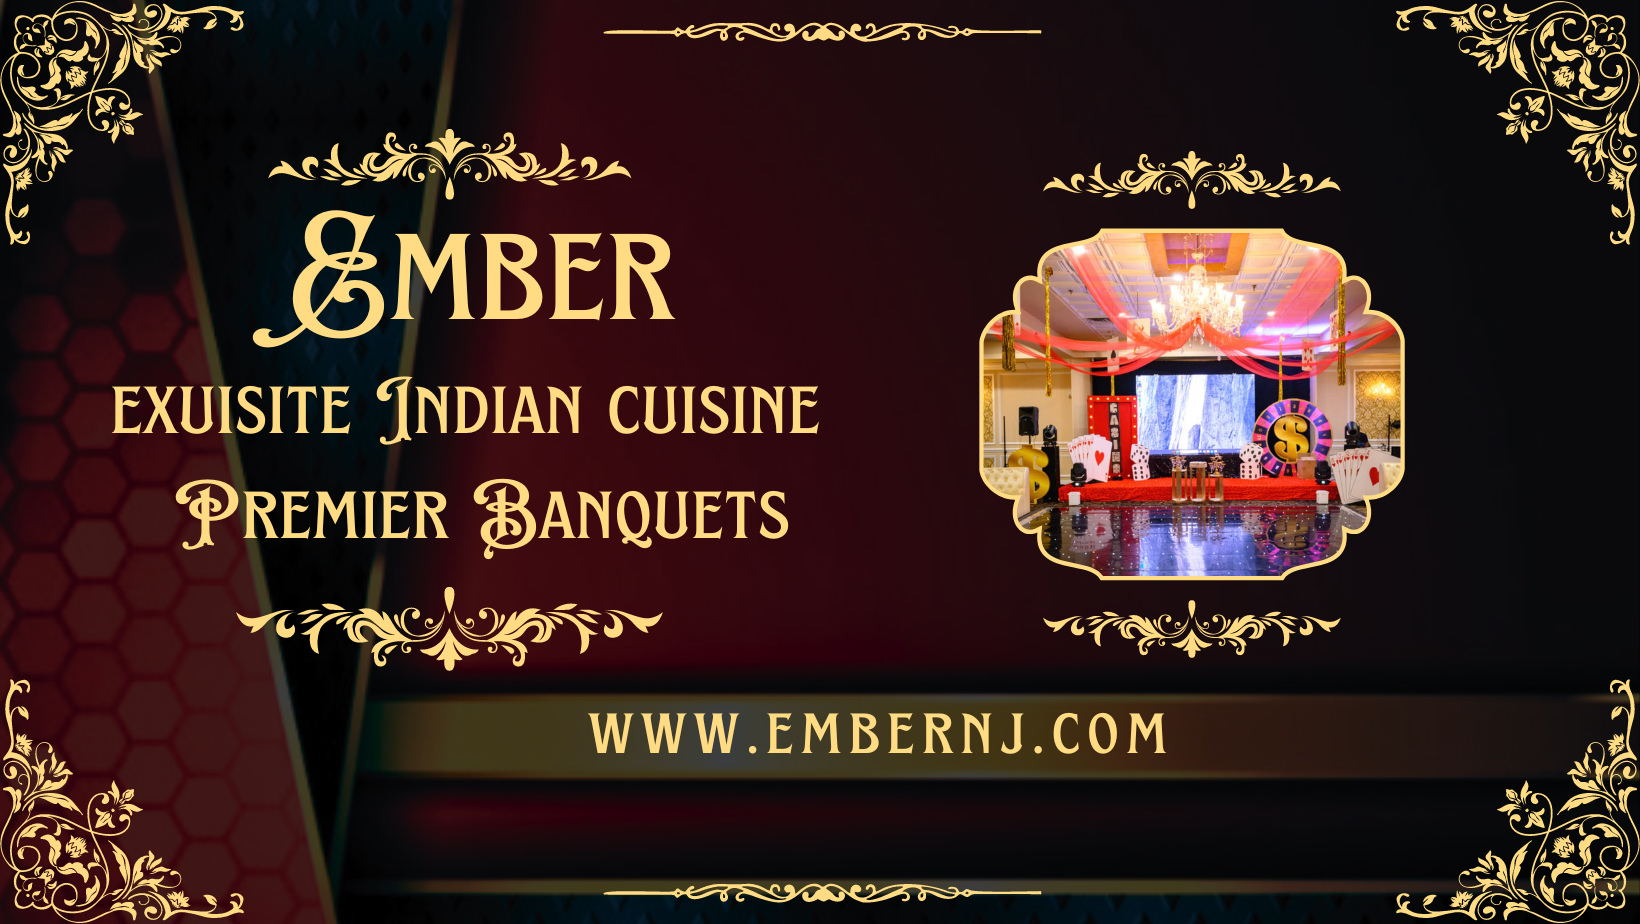 Ember Premier Banquets, Restaurant Take Outs and Catering